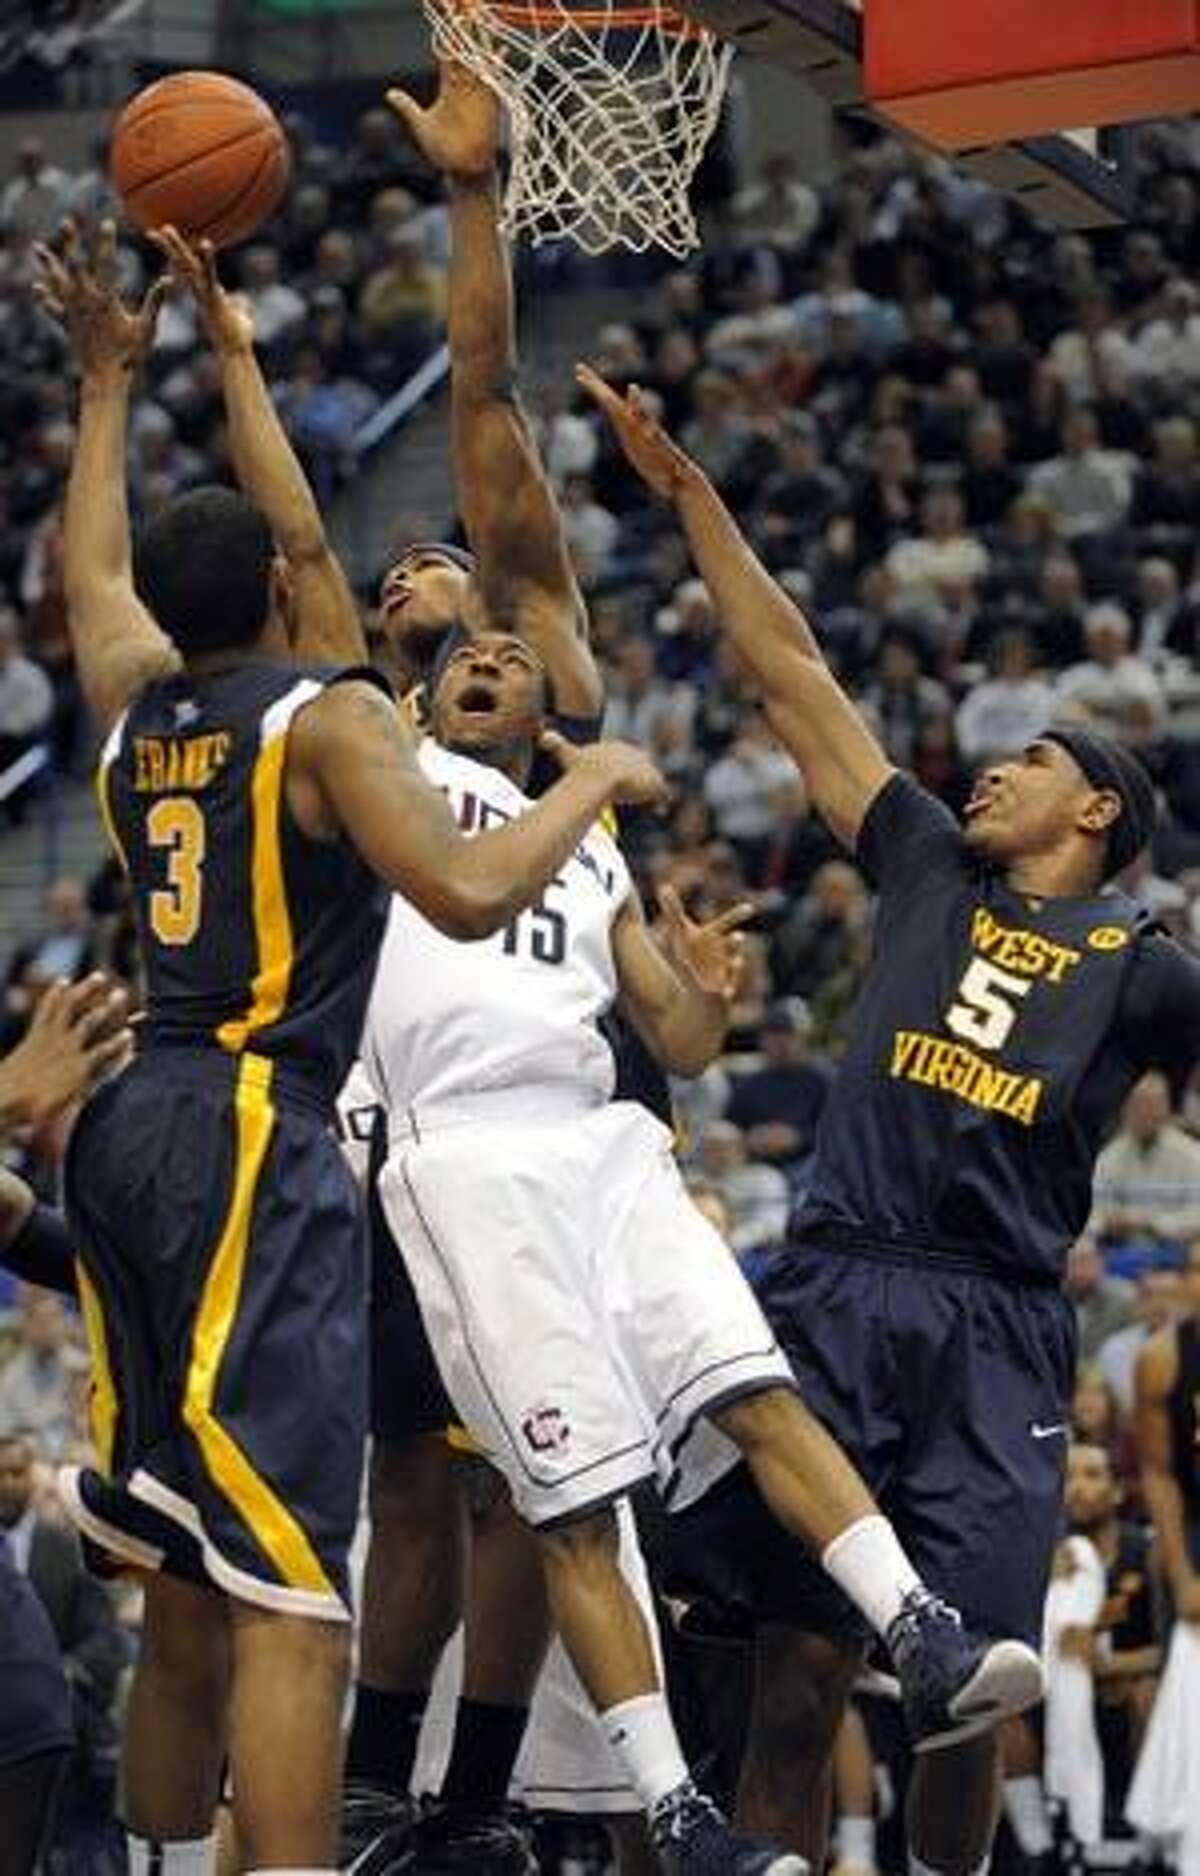 West Virginia's Devin Ebanks, (3), Danny Jennings, center, and Kevin Jones, (5), defend against Connecticut's Kemba Walker during the first half of Monday's game in Hartford. (AP Photo/Fred Beckham)